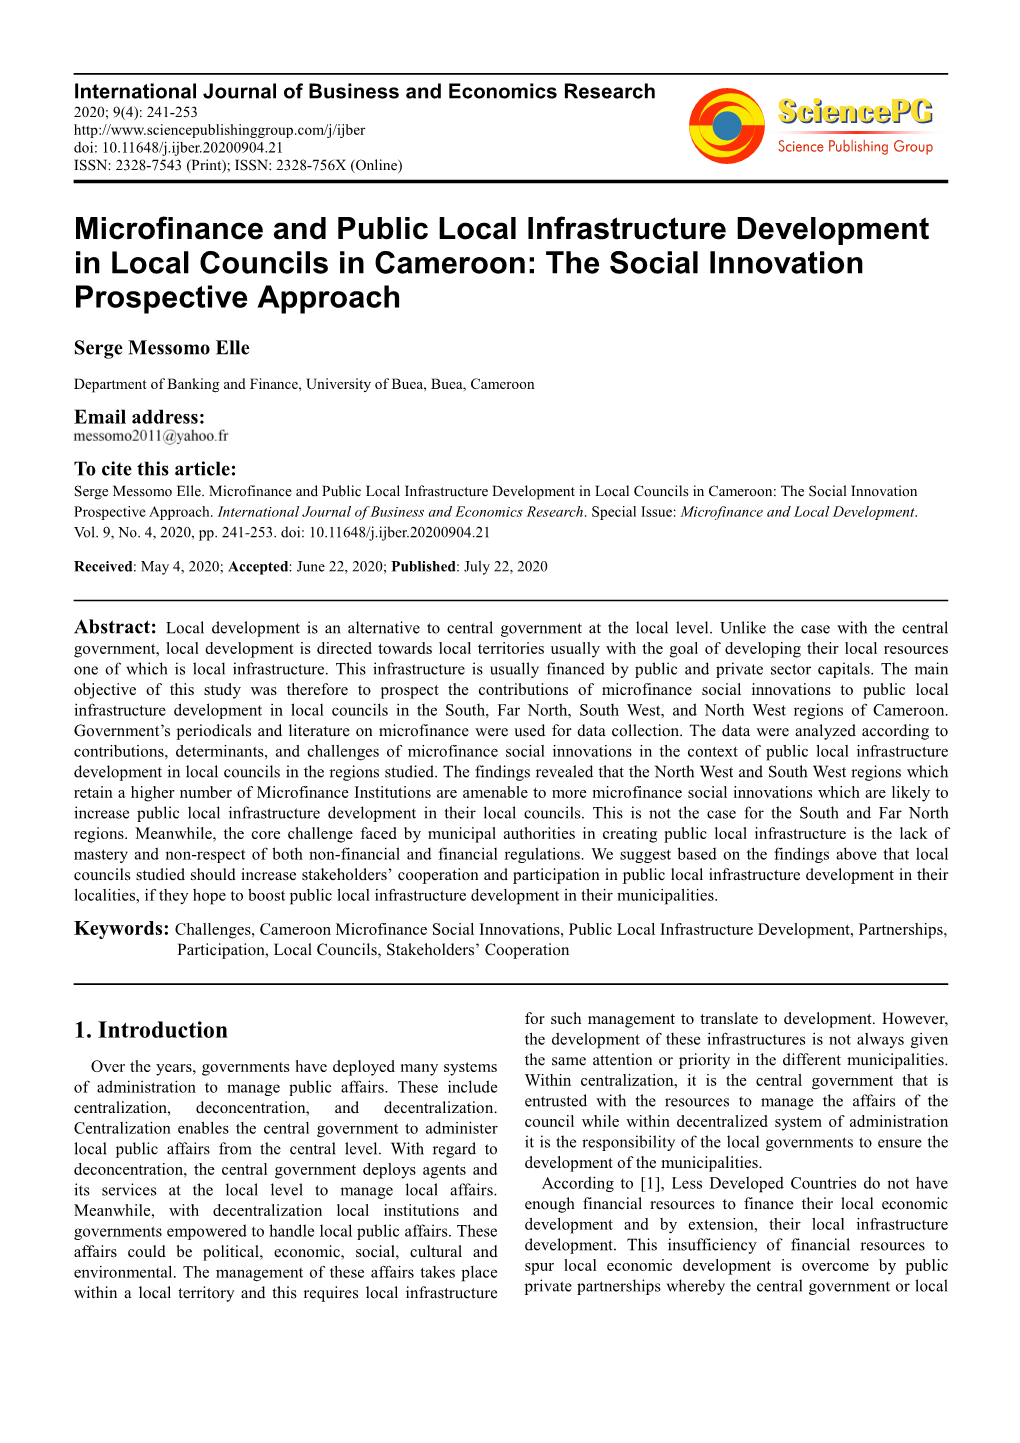 Microfinance and Public Local Infrastructure Development in Local Councils in Cameroon: the Social Innovation Prospective Approach